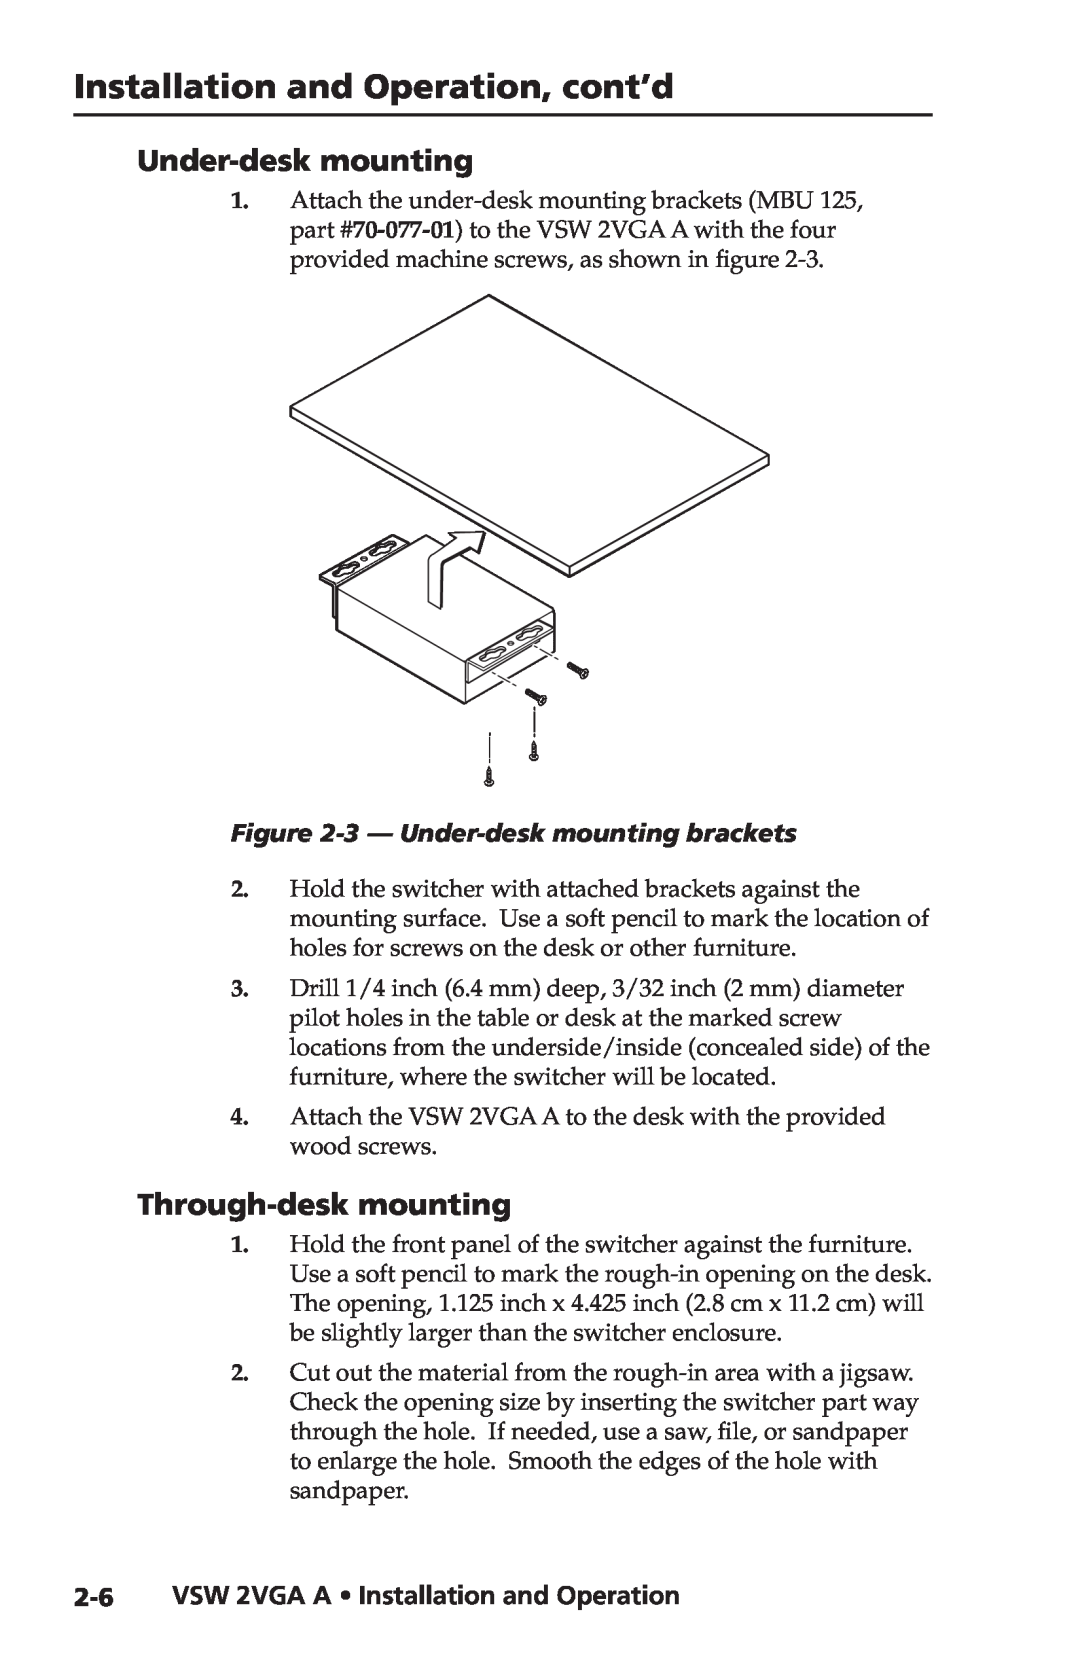 Extron electronic user manual Under-desk mounting, Through-desk mounting, VSW 2VGA A Installation and Operation 